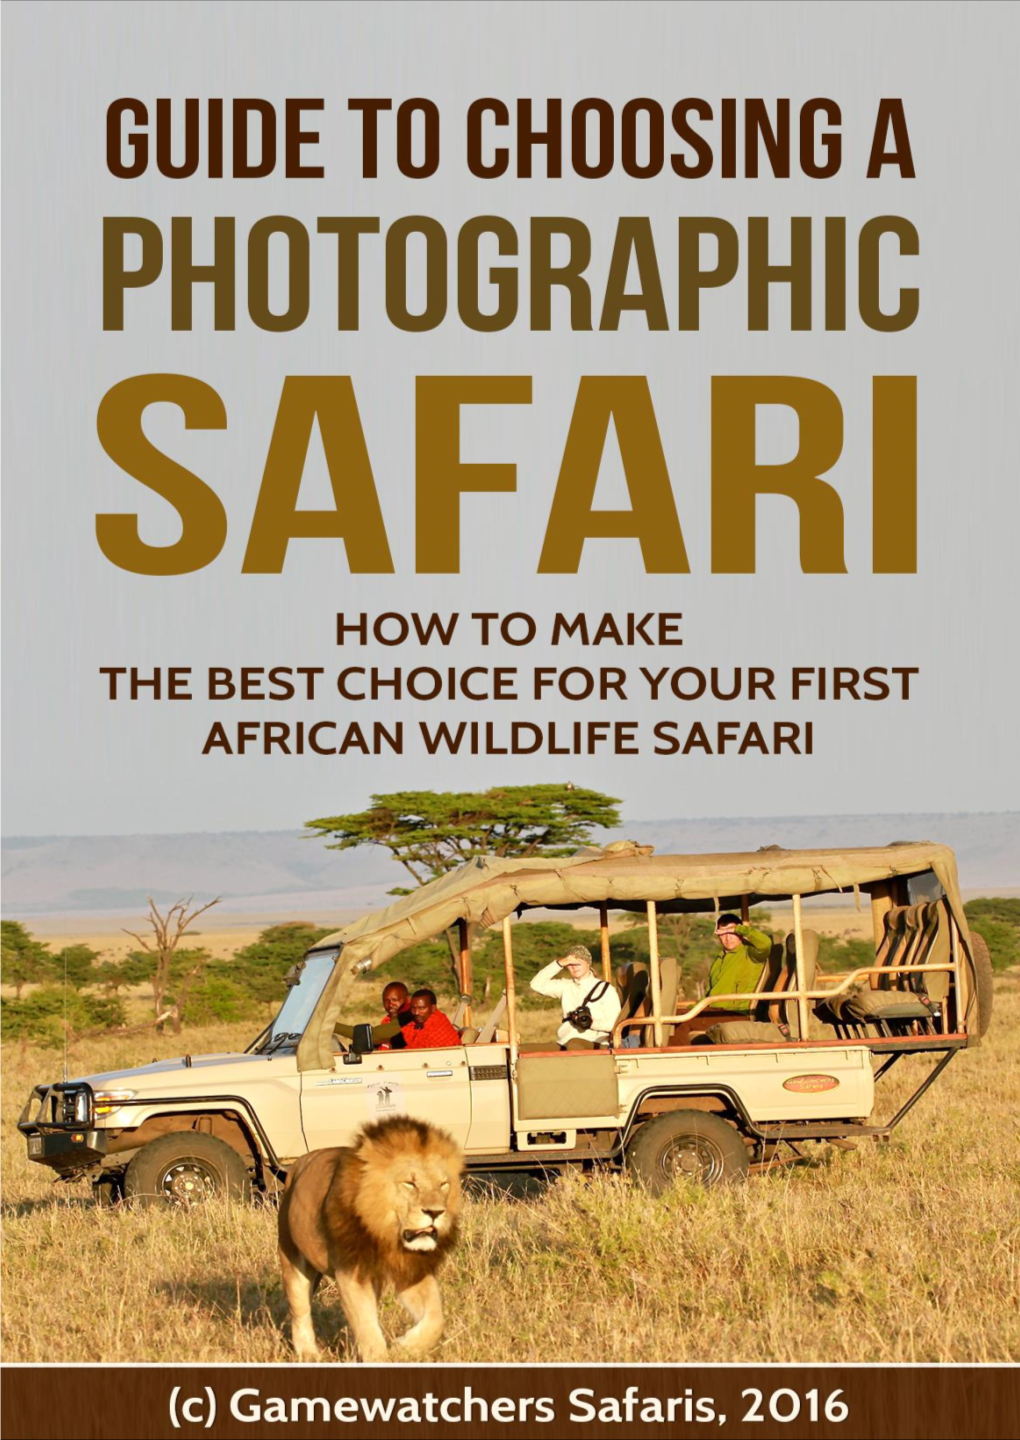 What Different Sorts of Accommodation Are Available on Safari and Which Should I Choose